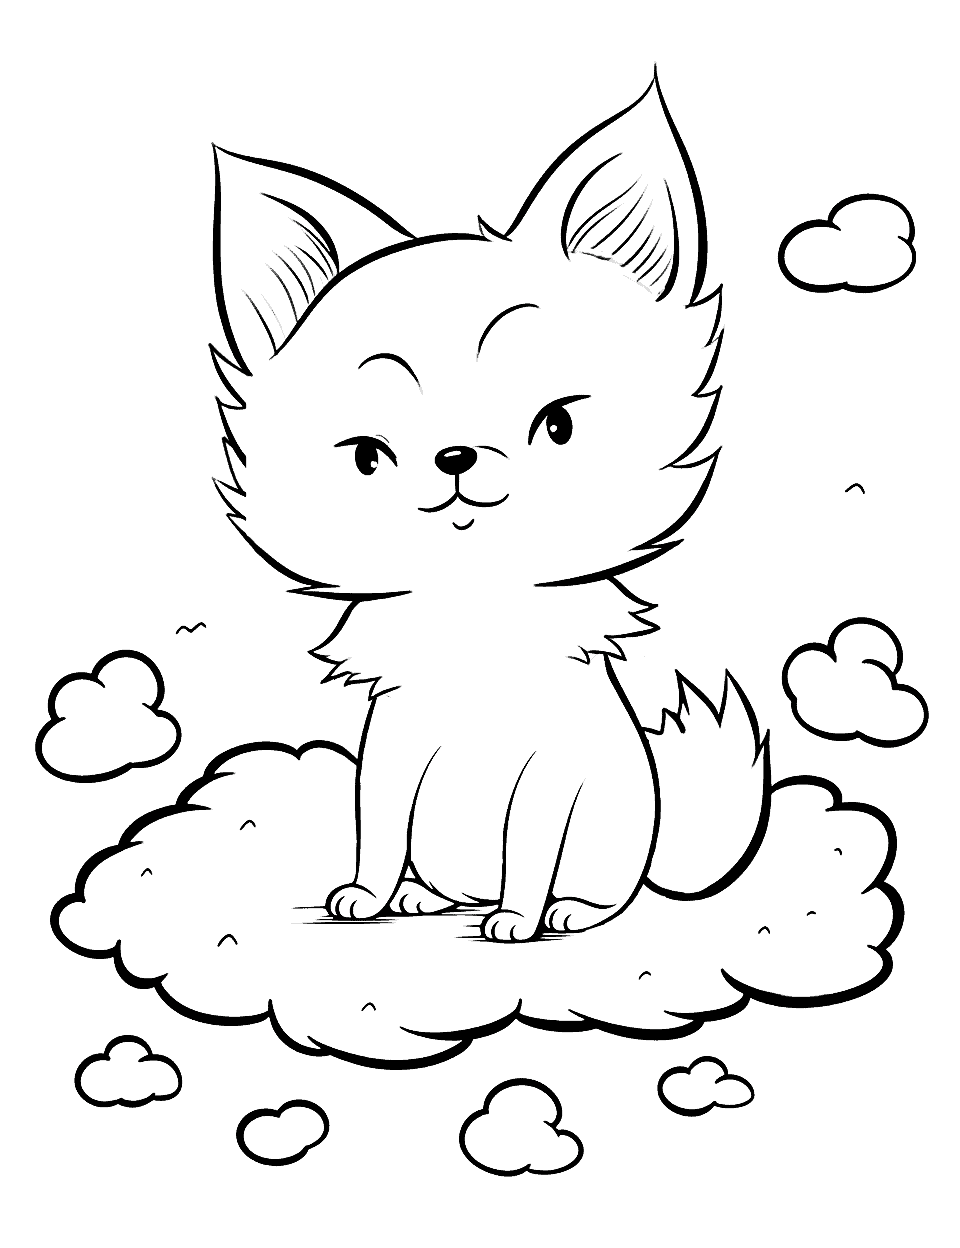 Fox's Dreamy Cloud Ride Fox Coloring Page - A fox sitting on a fluffy cloud, this fox travels across the sky.